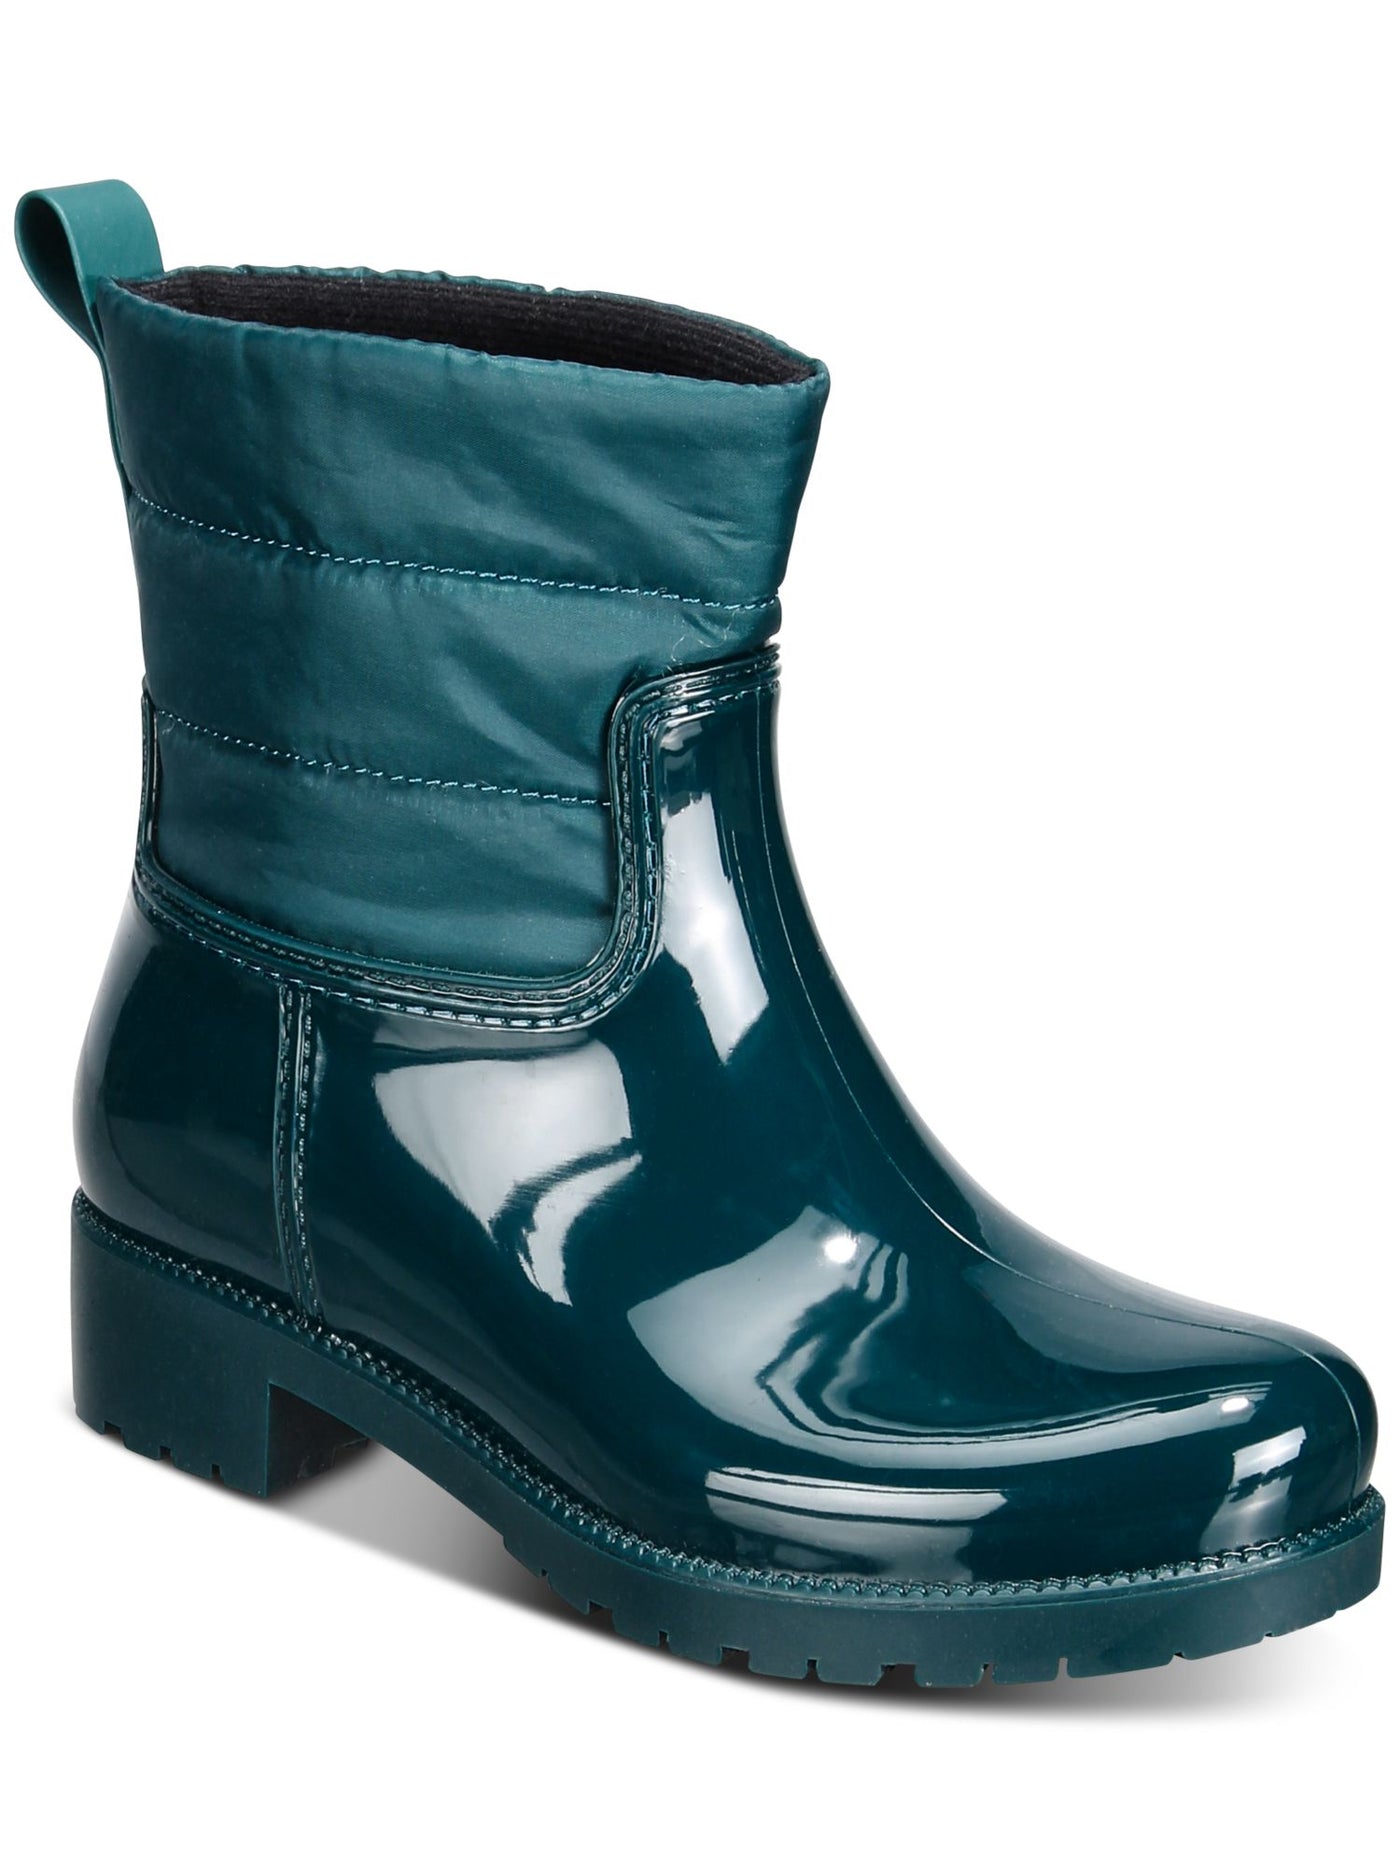 CHARTER CLUB Womens Green Back Pull-Tab Water Resistant Padded Trudyy Round Toe Block Heel Rain Boots 7 M